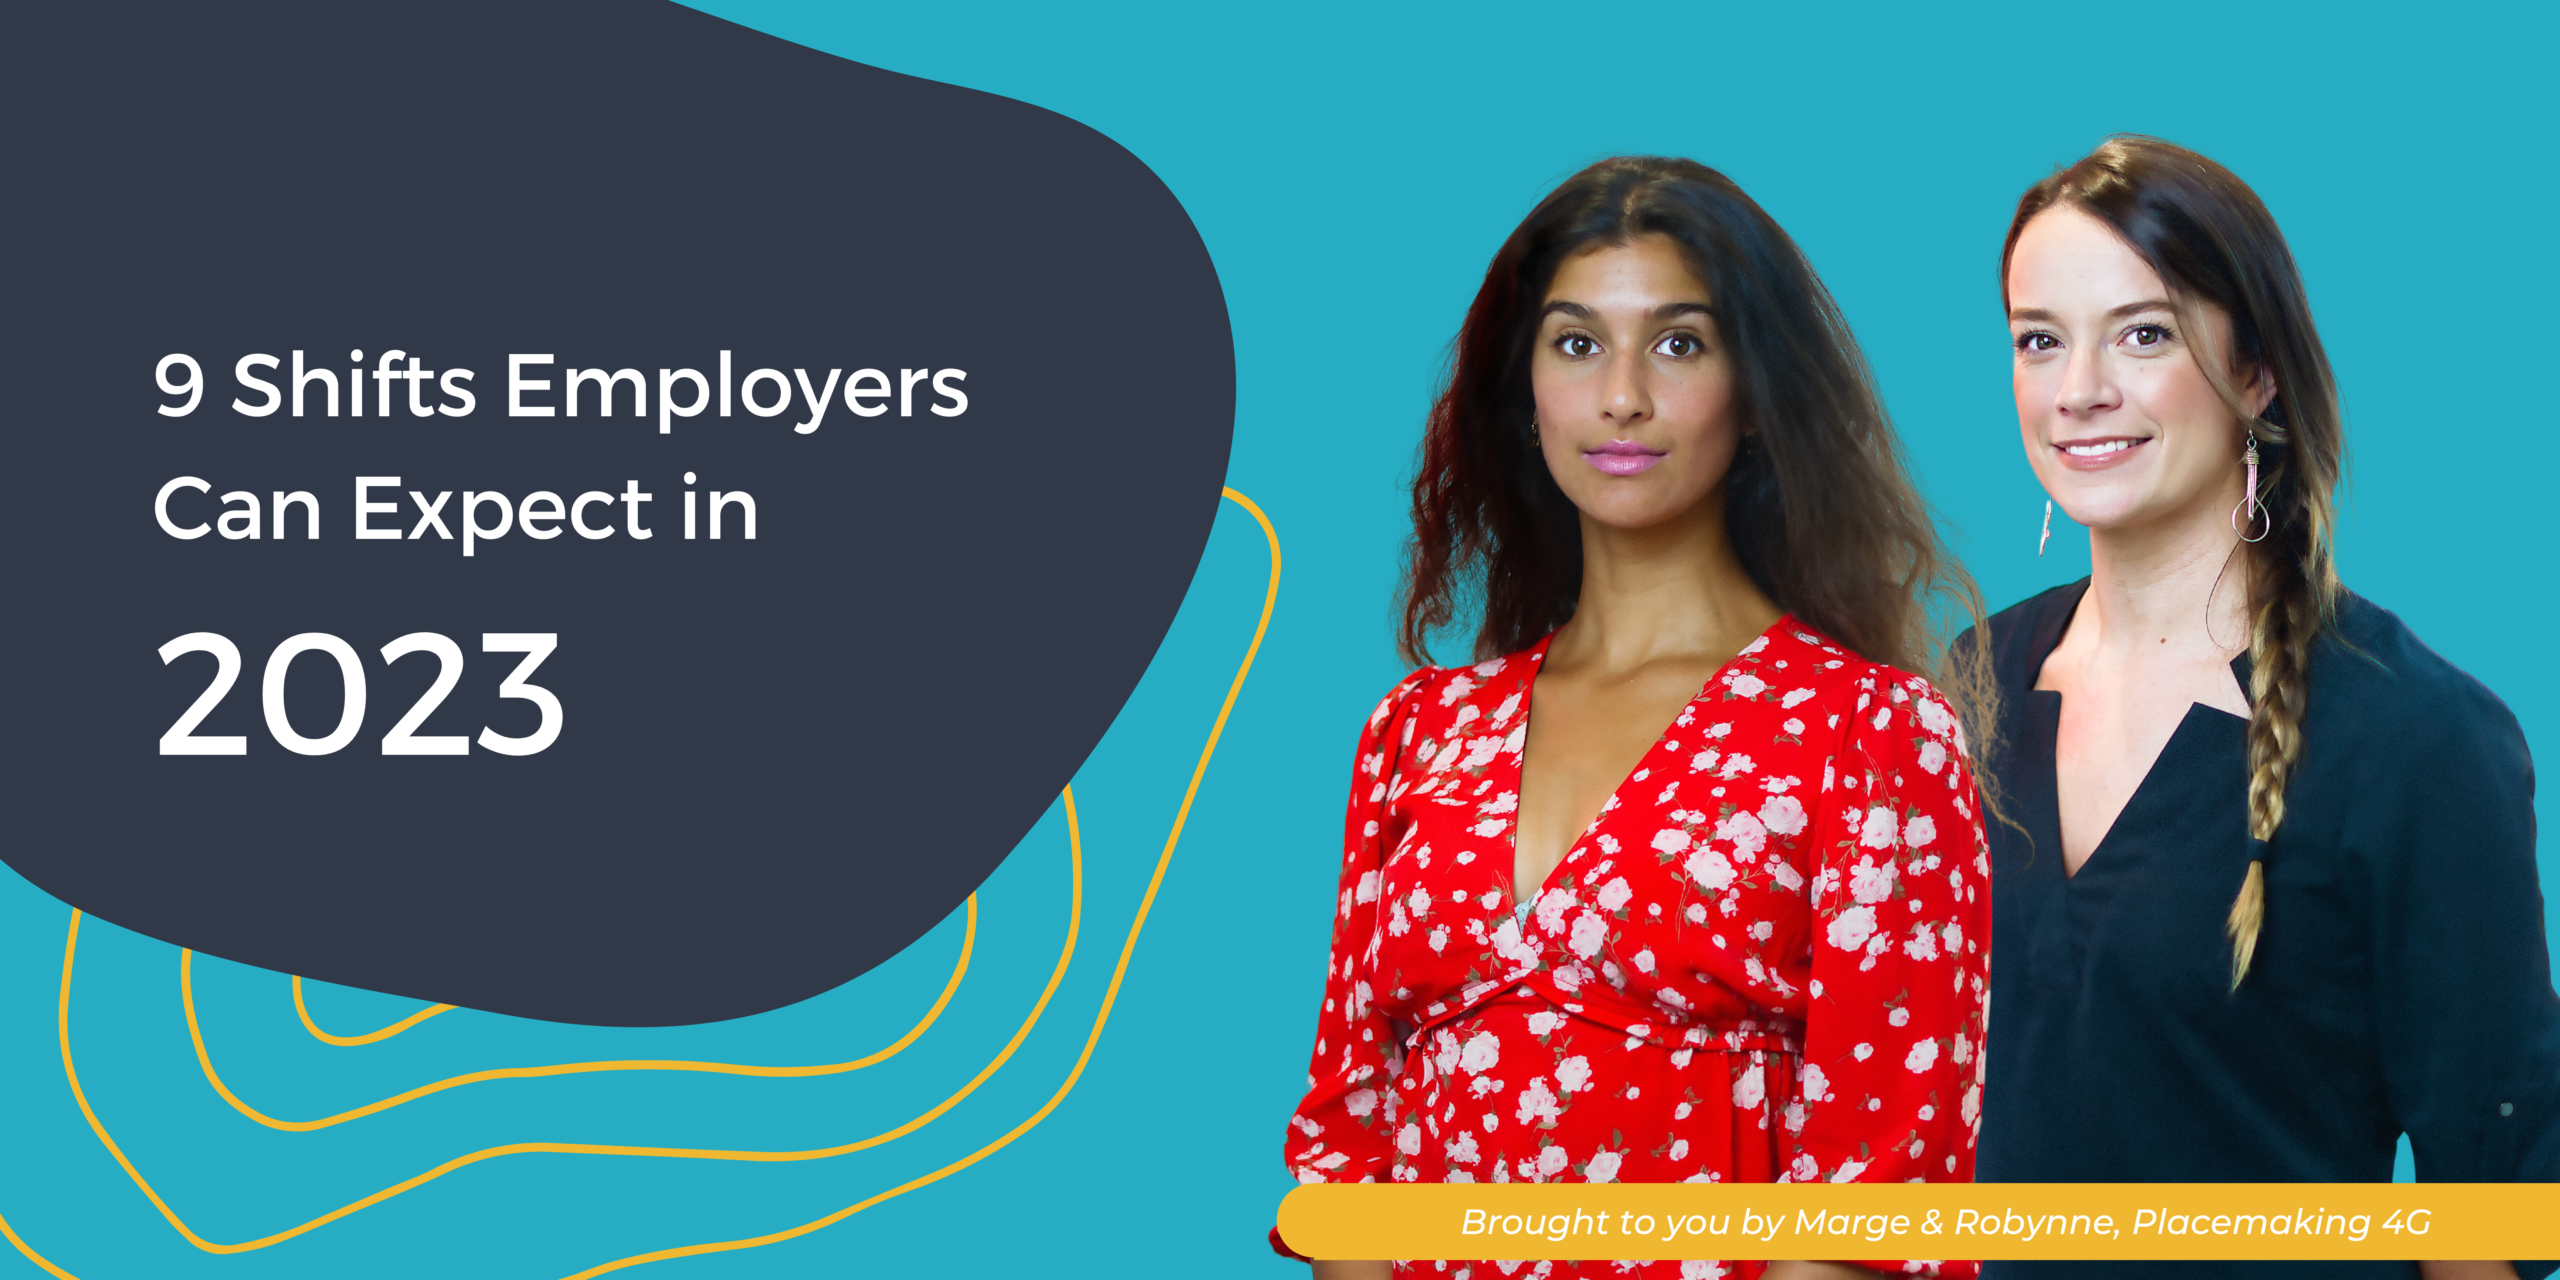 In a dark blue bubble on the left, white text reads 8 shifts employers can expect in 2023. On the right, behind a light blue background are two cropped images of women, Margaret and Robynne, who work at P4G. Margaret is wearing a red flower patterned shirt. Robynne is wearing a black long sleeve. There is small yellow bar along the bottom that says brought to you by Margaret and Robynne